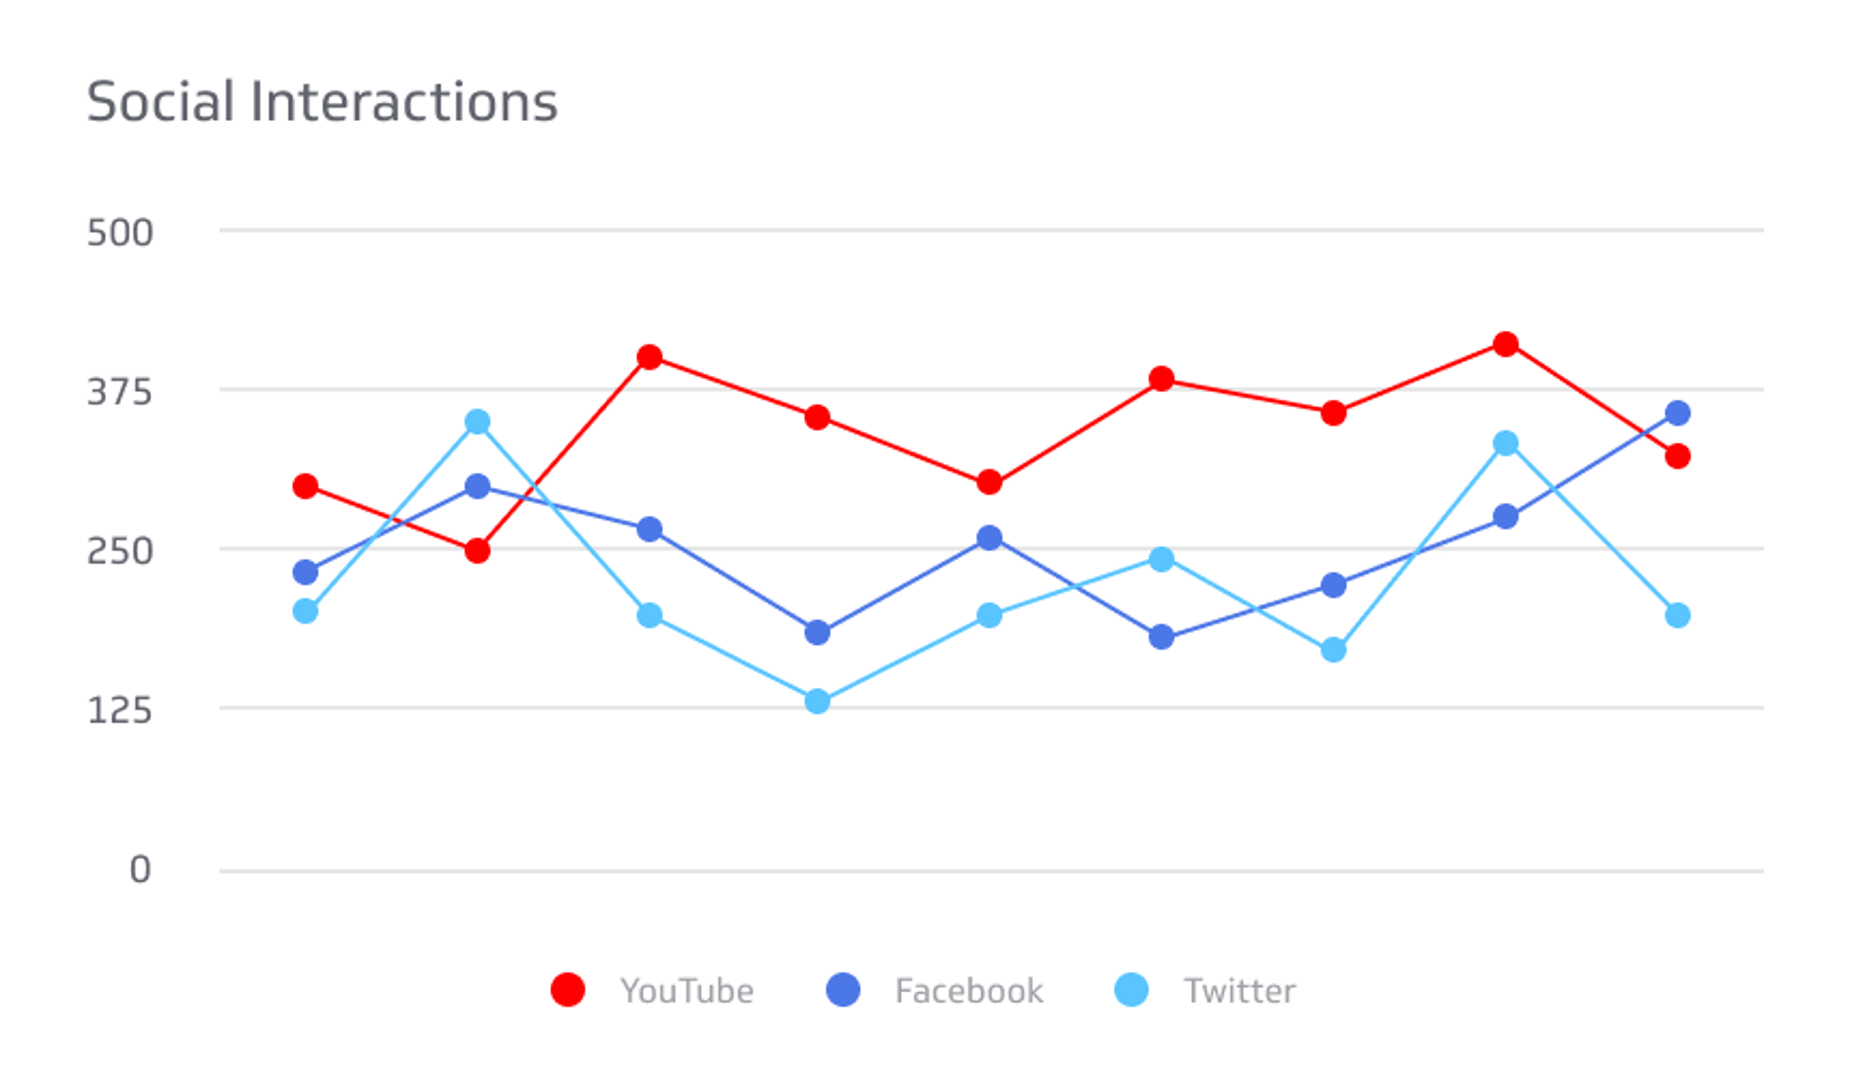 Related KPI Examples - Social Interactions Metric